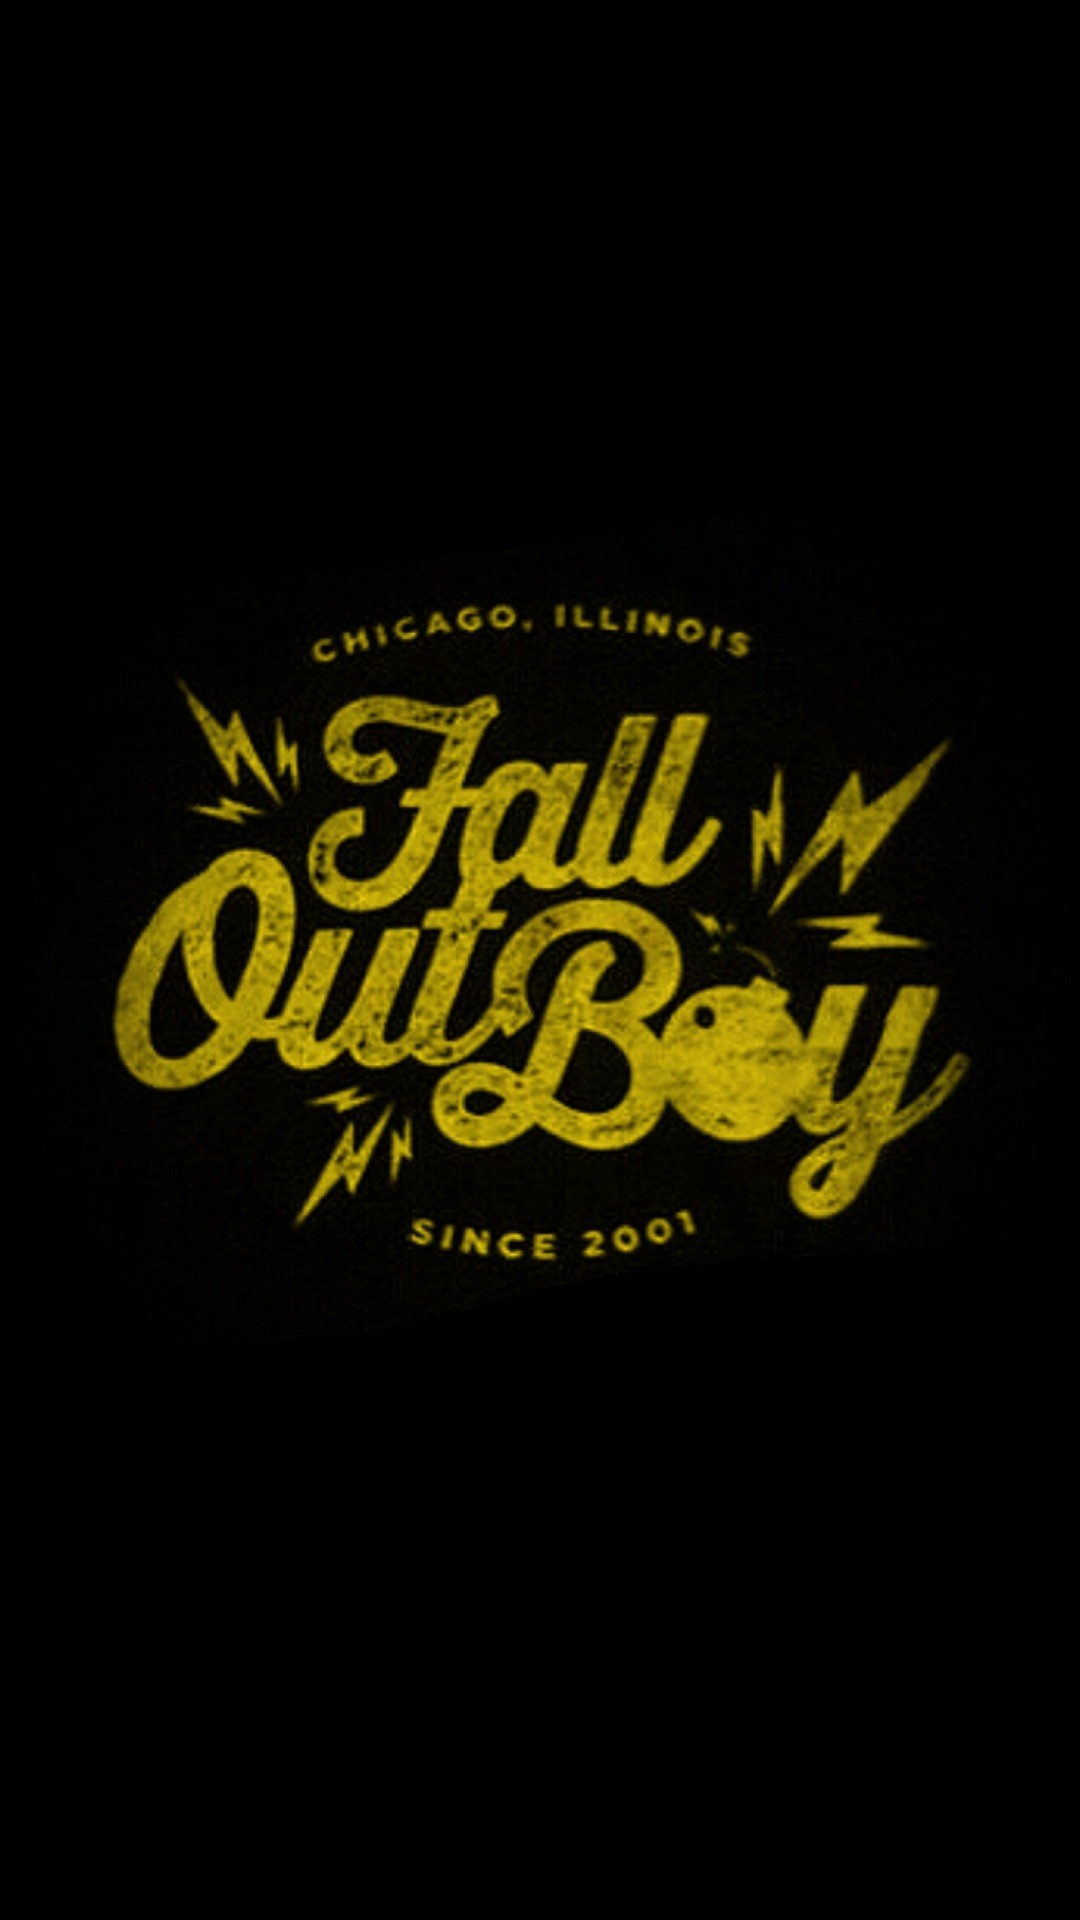 1080x1920 fall out boy wallpaper fall out boy fall out boy wallpaper iphone wallpaper  band wallpaper iphone